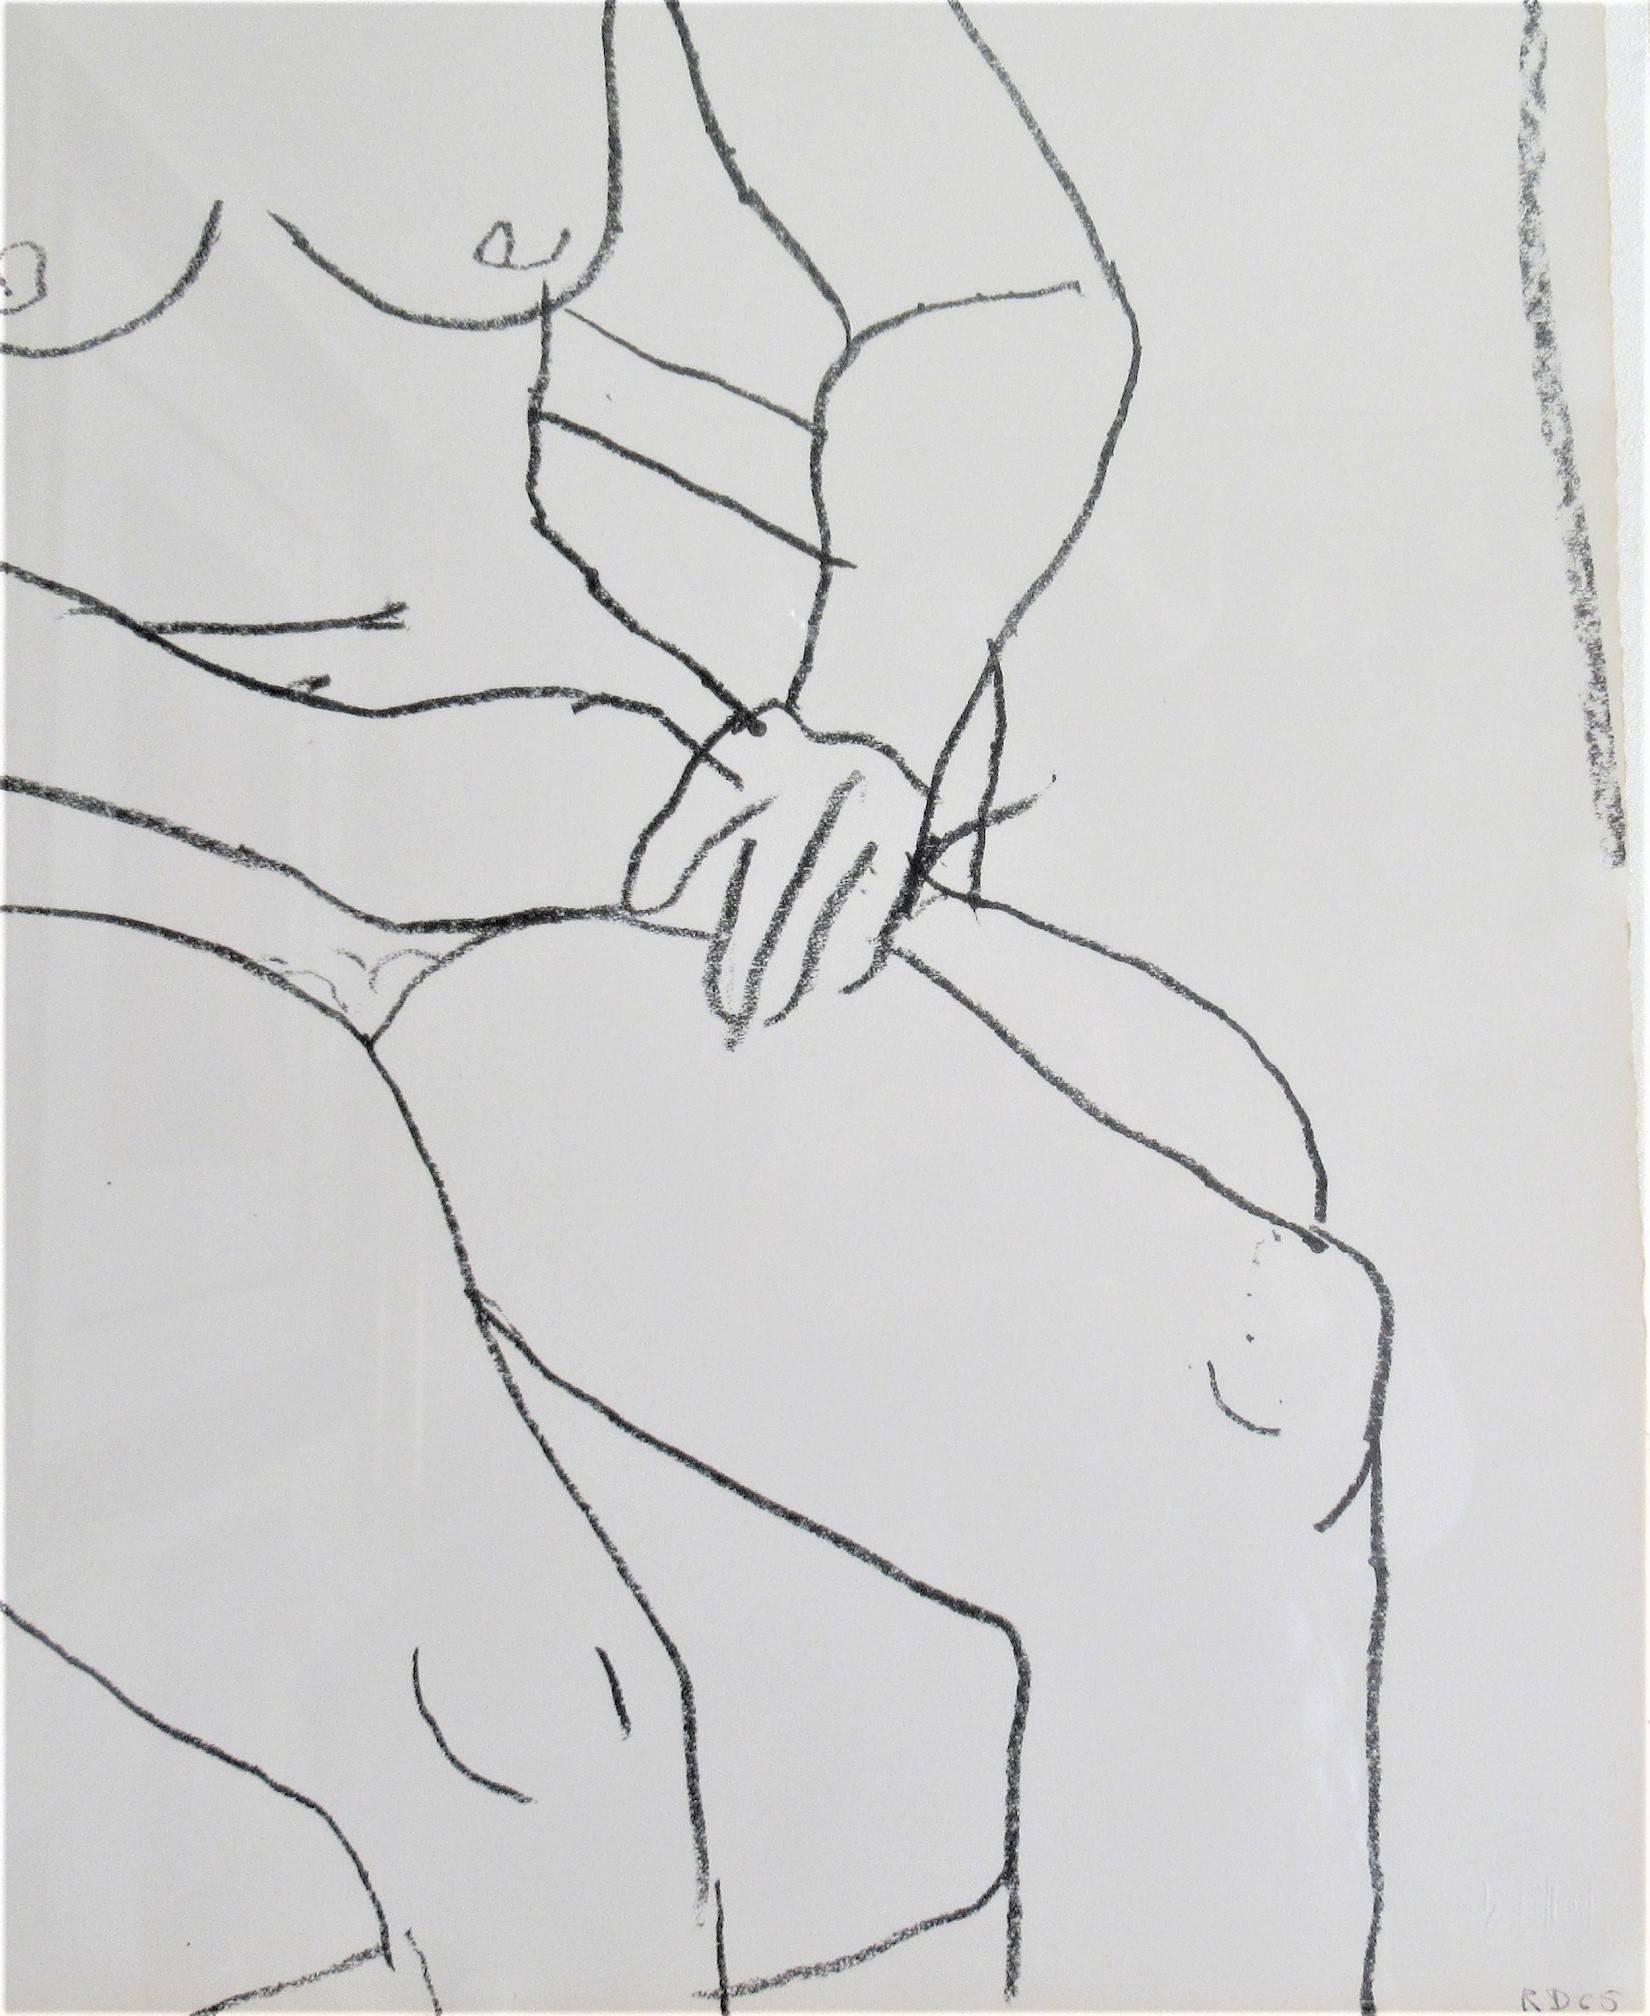 Seated Nude - Abstract Expressionist Print by Richard Diebenkorn